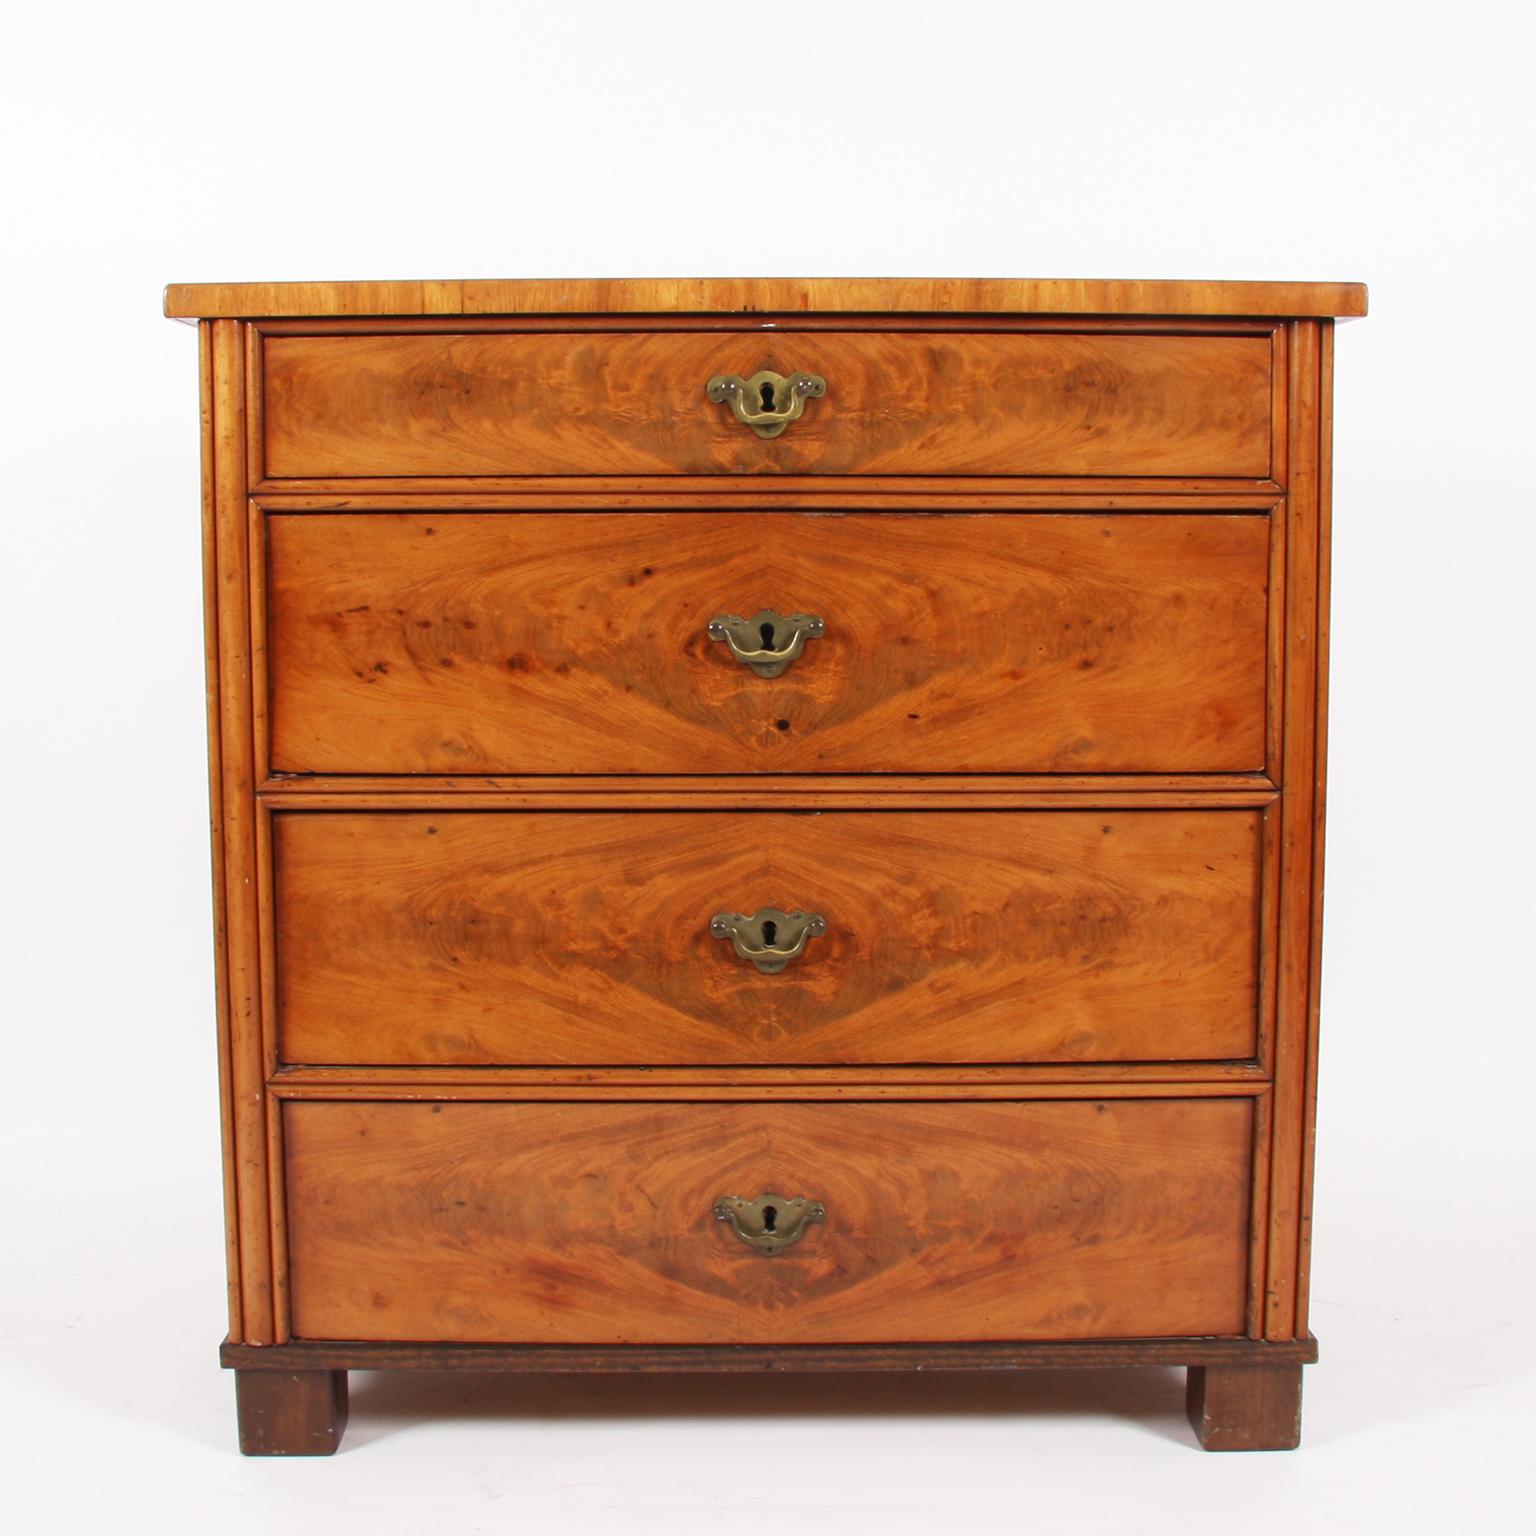 Swedish circa 1900.

An Estate made, Swedish, walnut commode sourced from a castle close to Helsingborg. Lovely figuring to the wood and beautiful handles.

Good condition. Wear consistent with age and use.
 